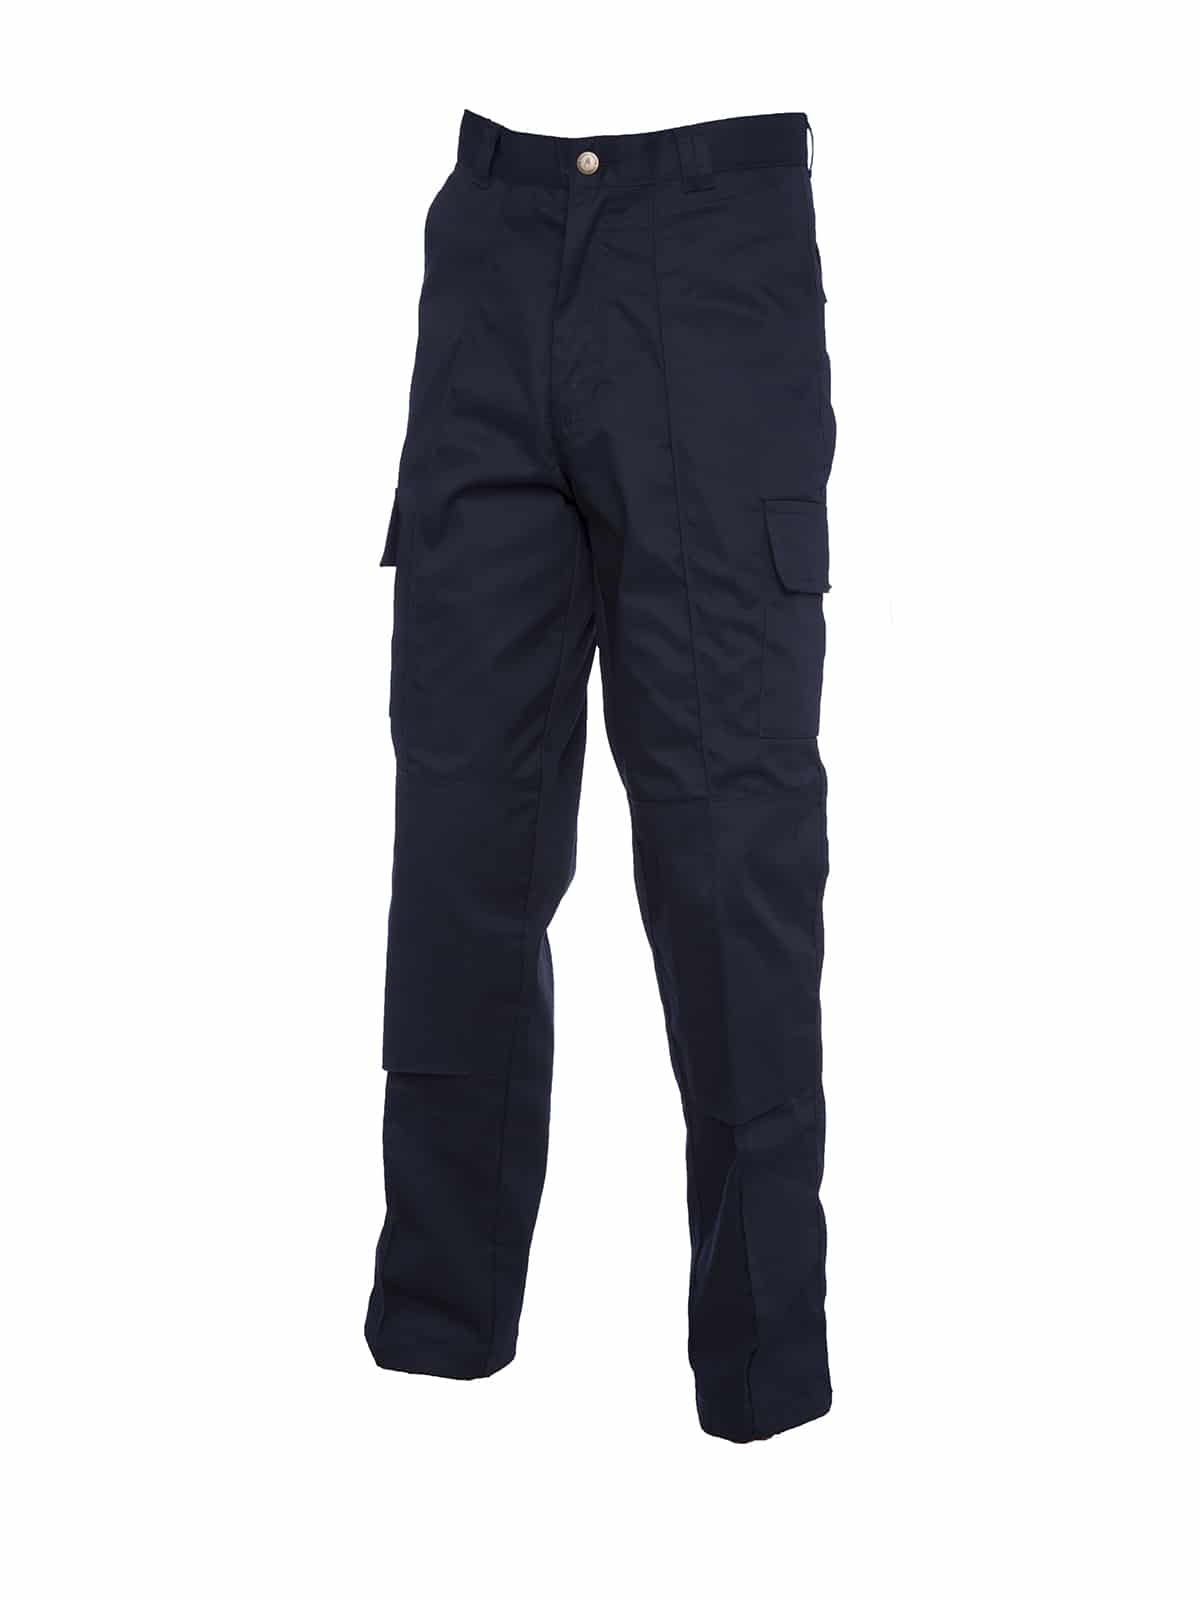 Uneek Cargo Trousers with Knee Pad Pockets - Long